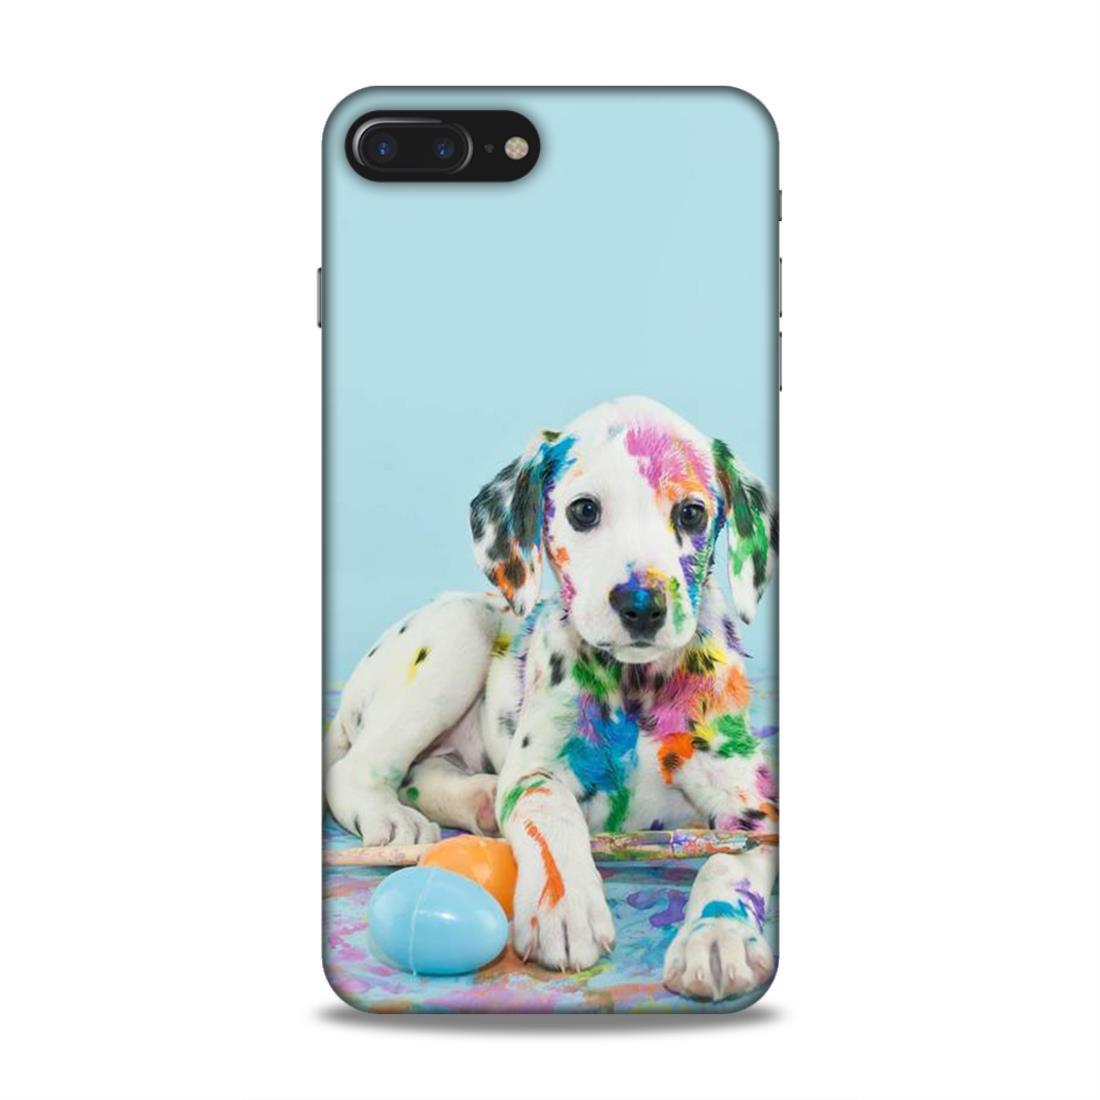 Cute Dog Lover iPhone 8 Plus Mobile Case Cover